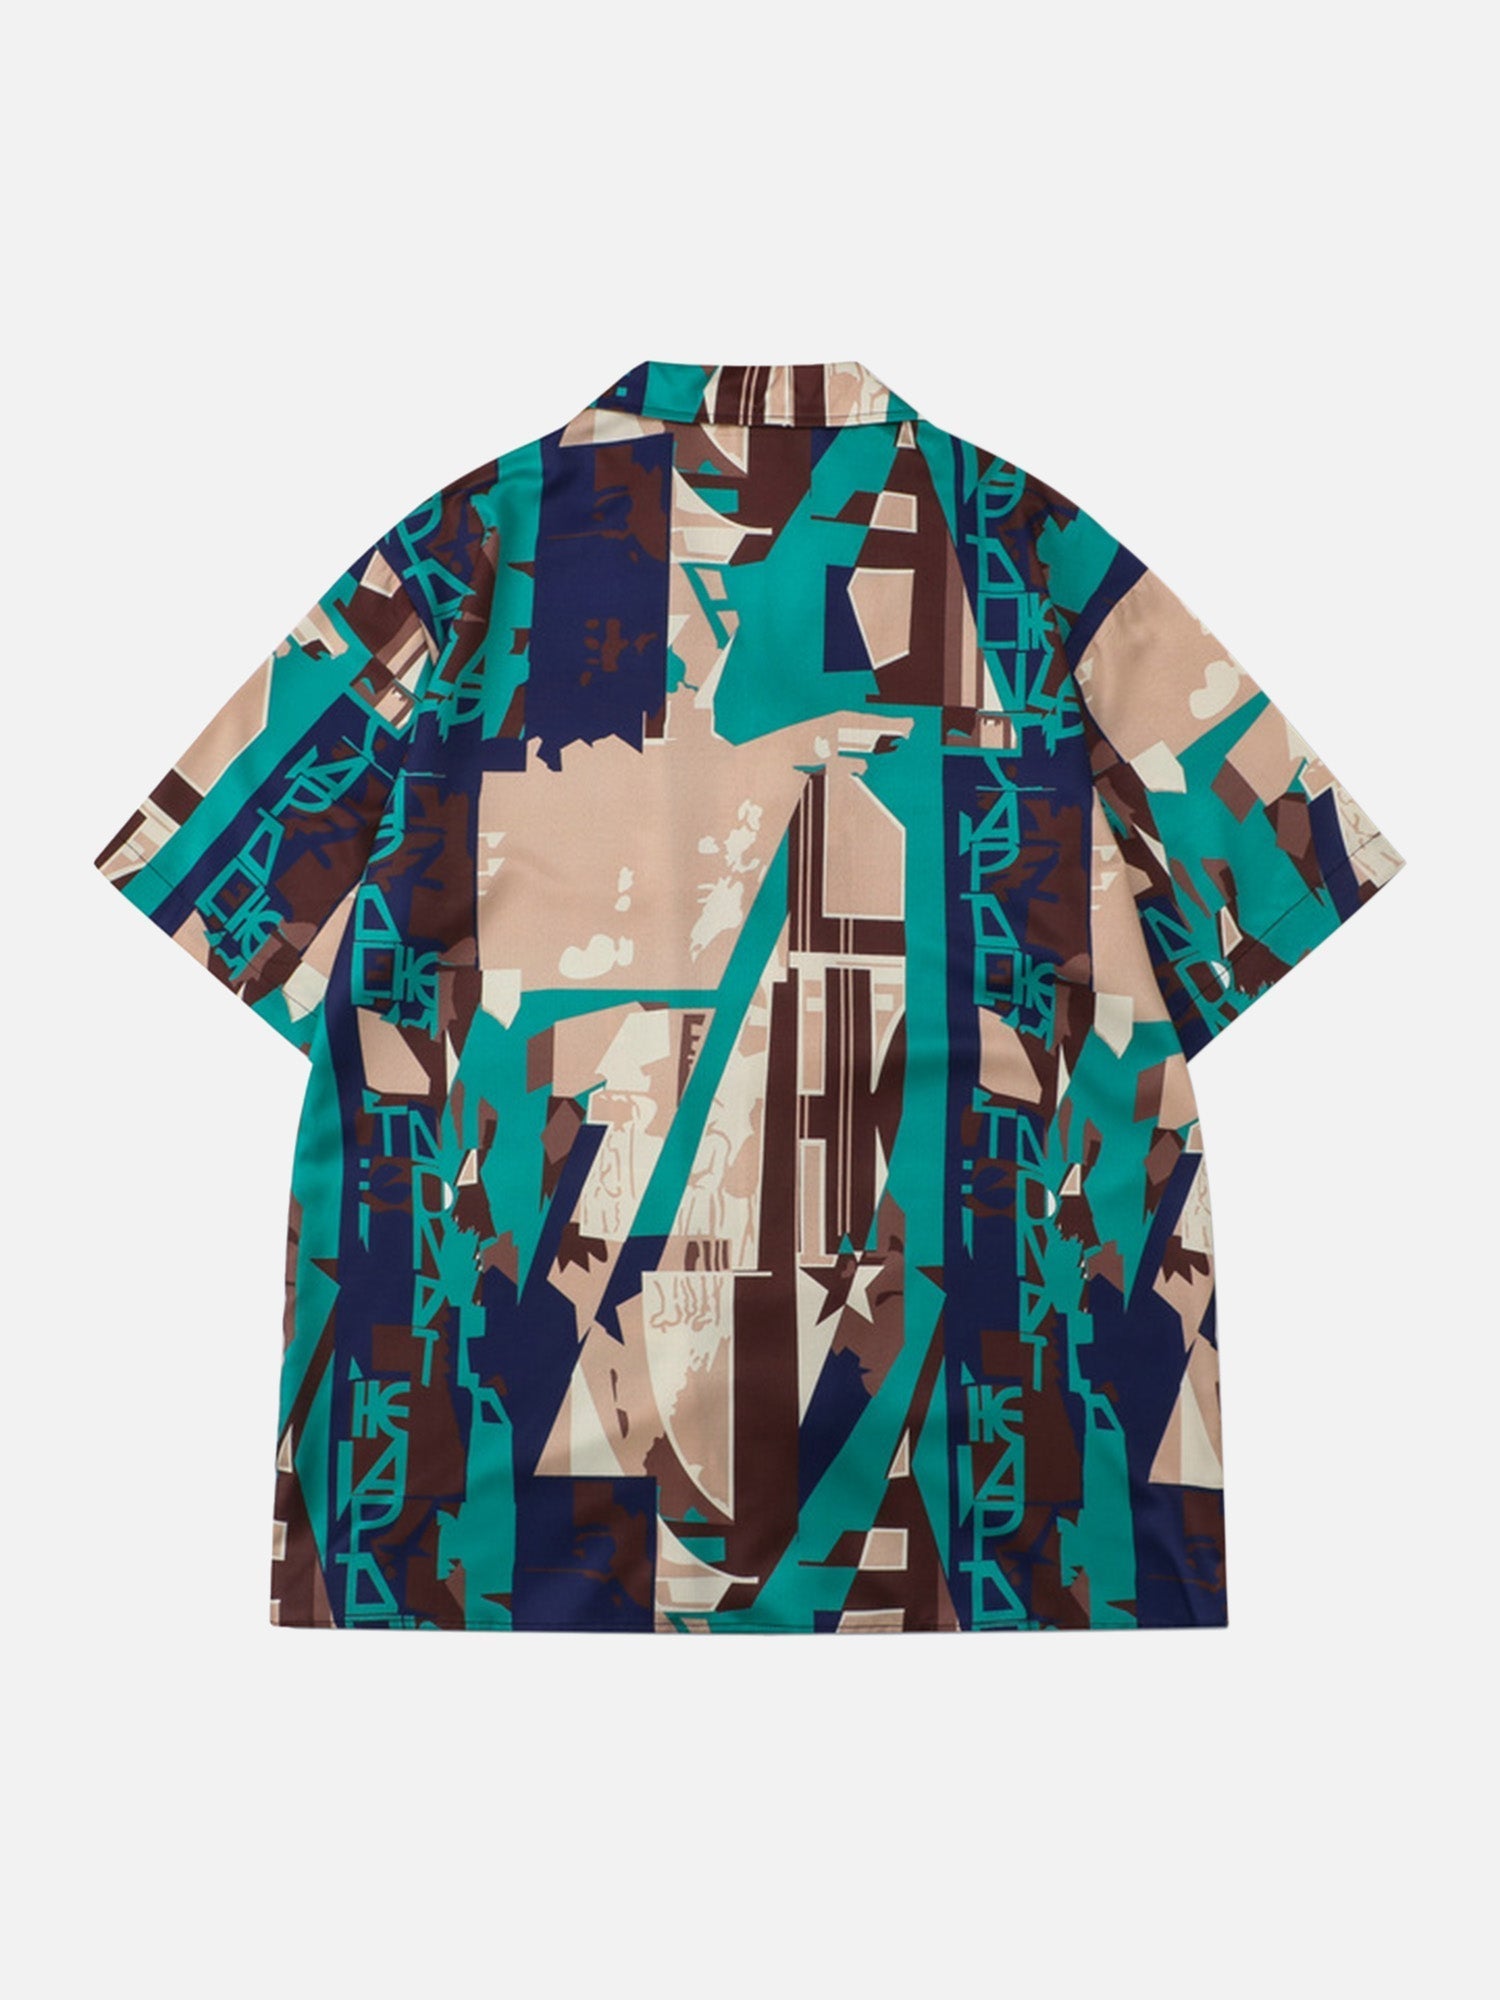 Abstract Fun All-over Printed Rap Shirts Floral Shirt Short Suit